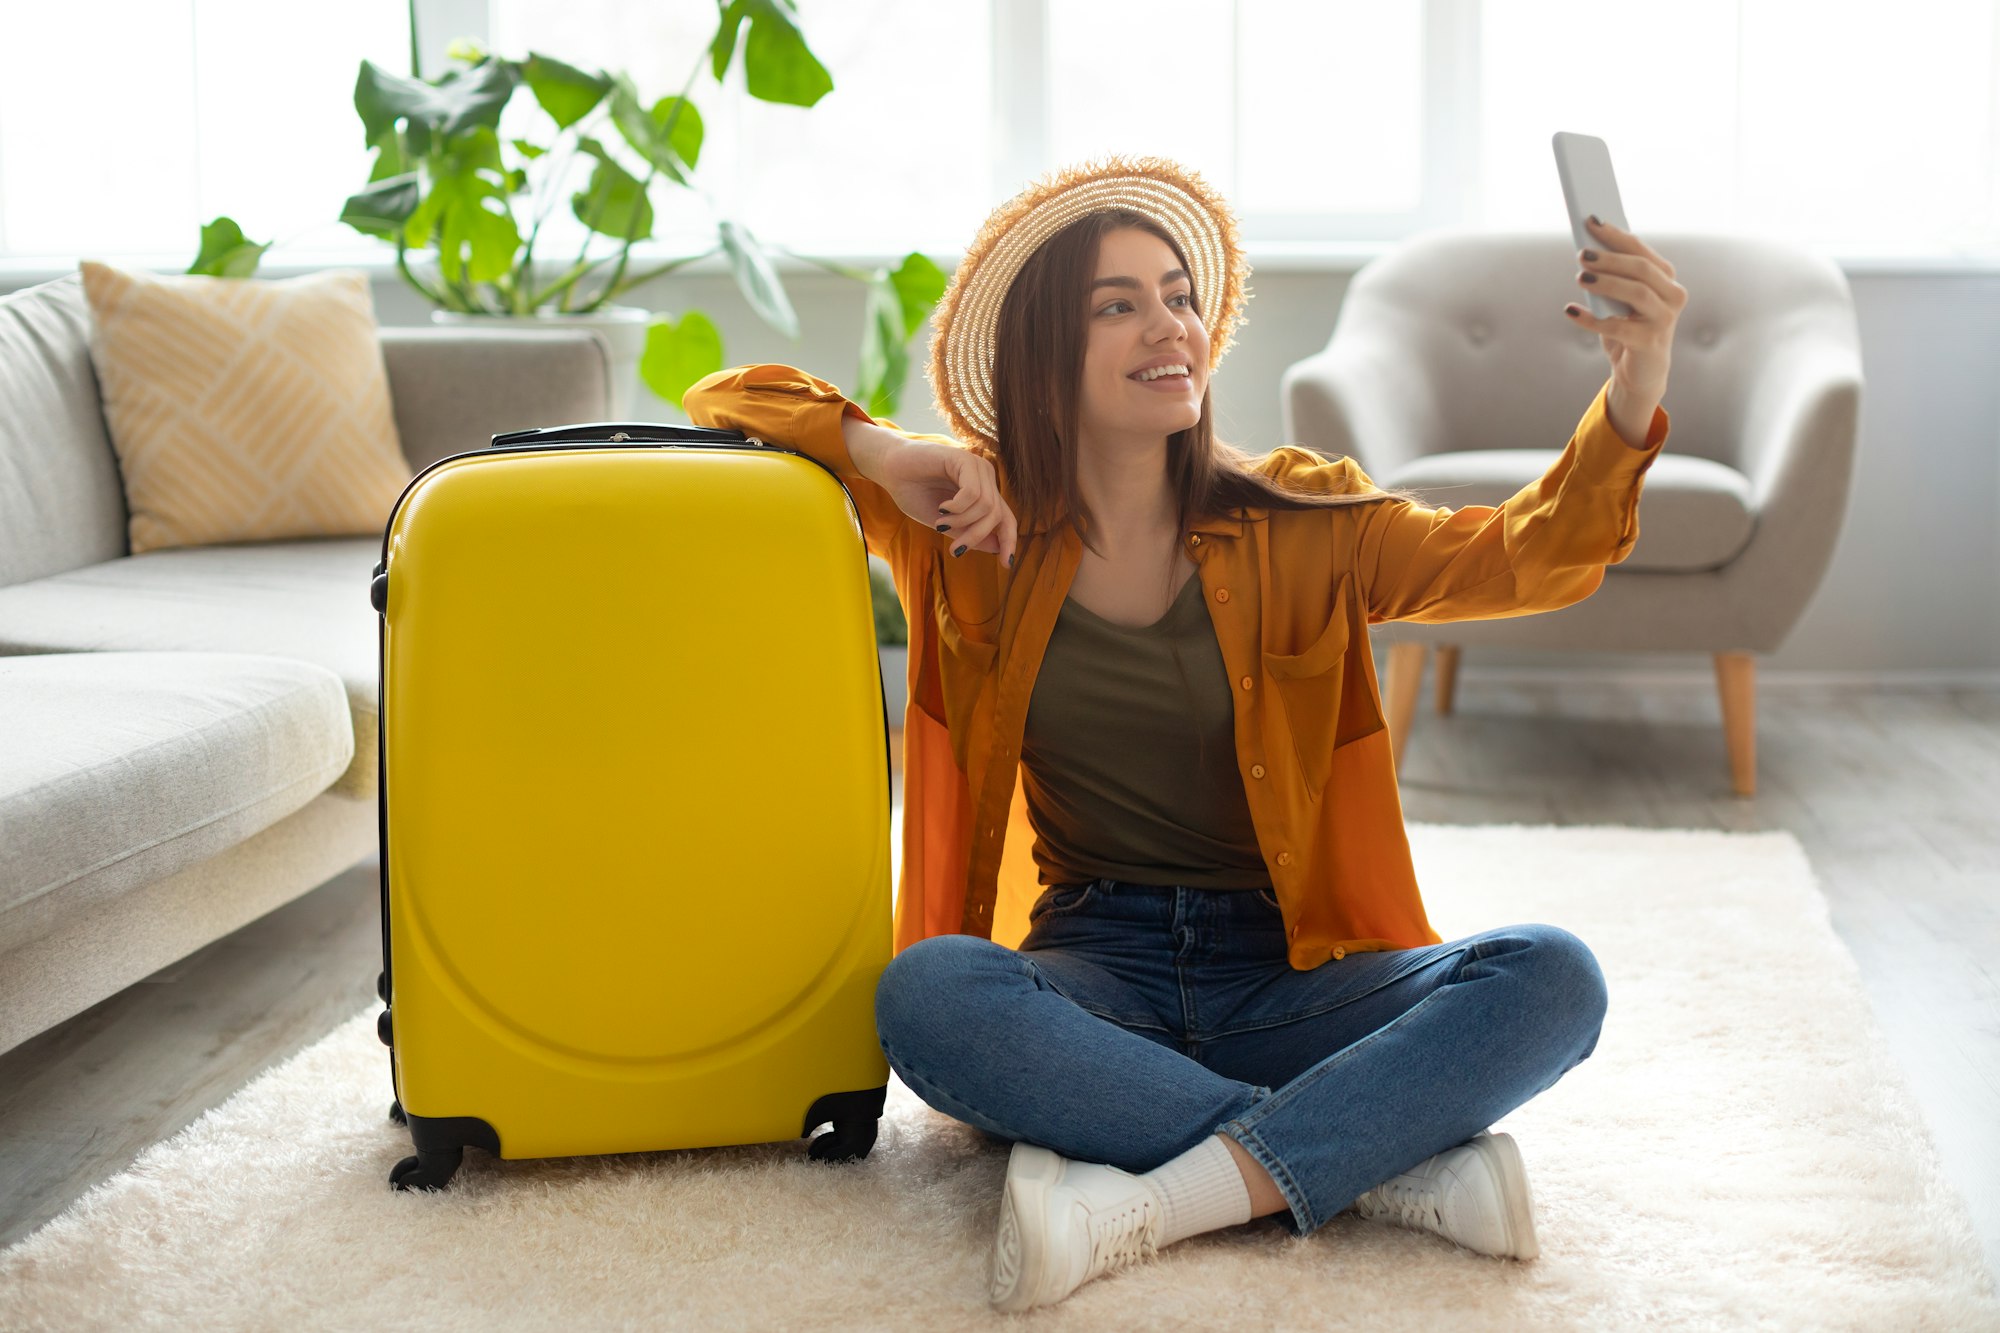 Cheerful young woman with bright suitcase taking selfie, getting ready for vacation at home